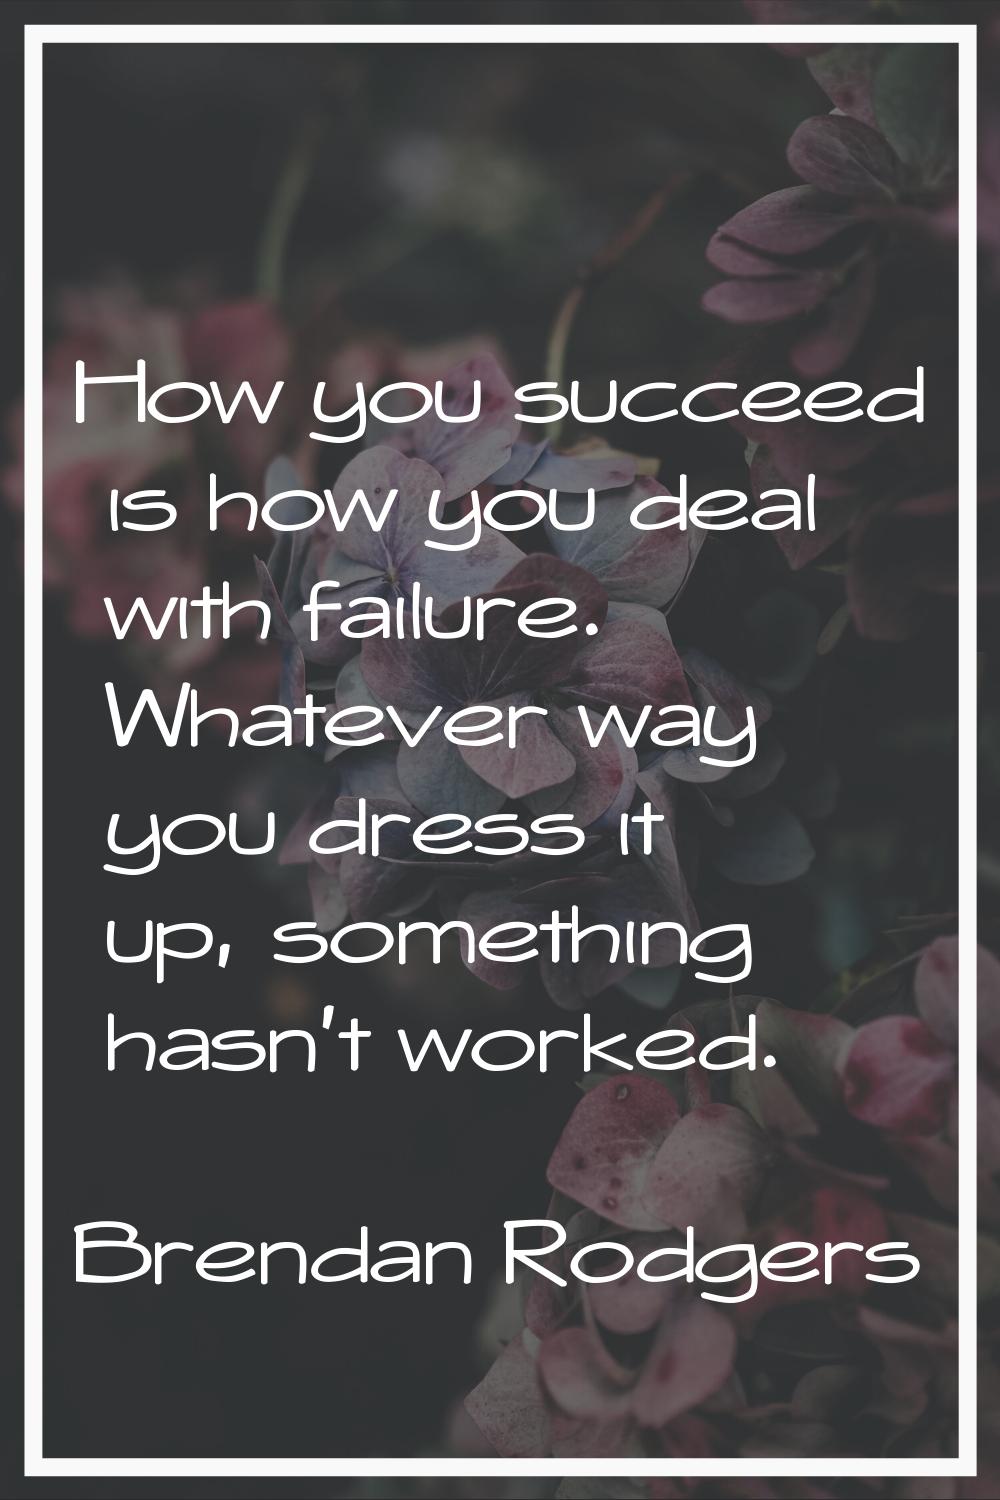 How you succeed is how you deal with failure. Whatever way you dress it up, something hasn't worked